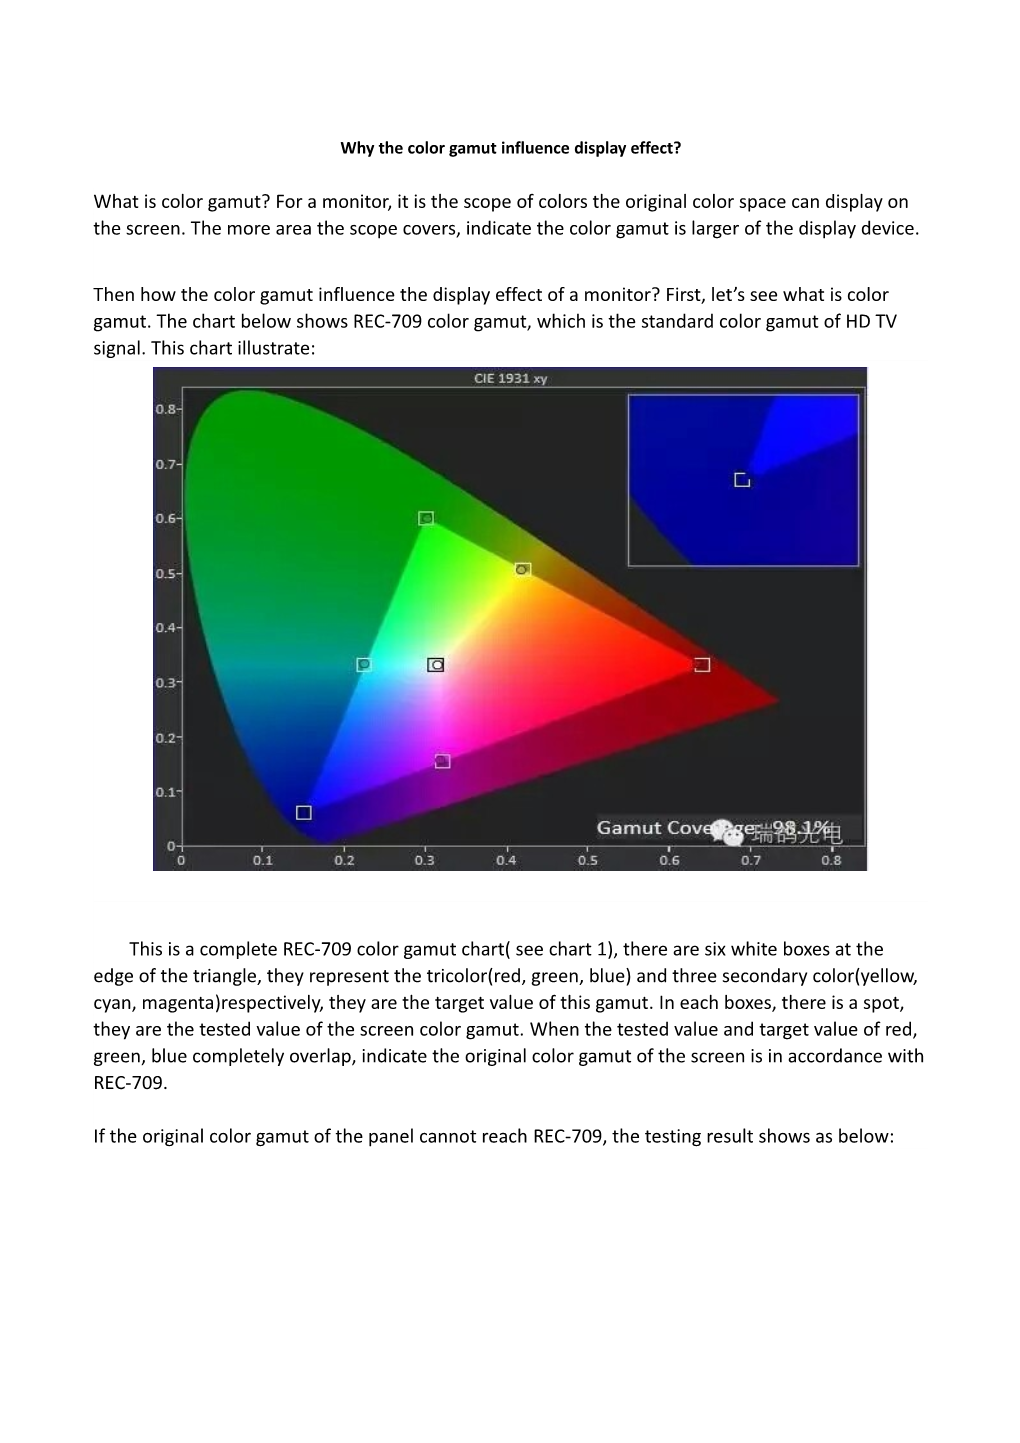 Why the Color Gamut Influence Display Effect?